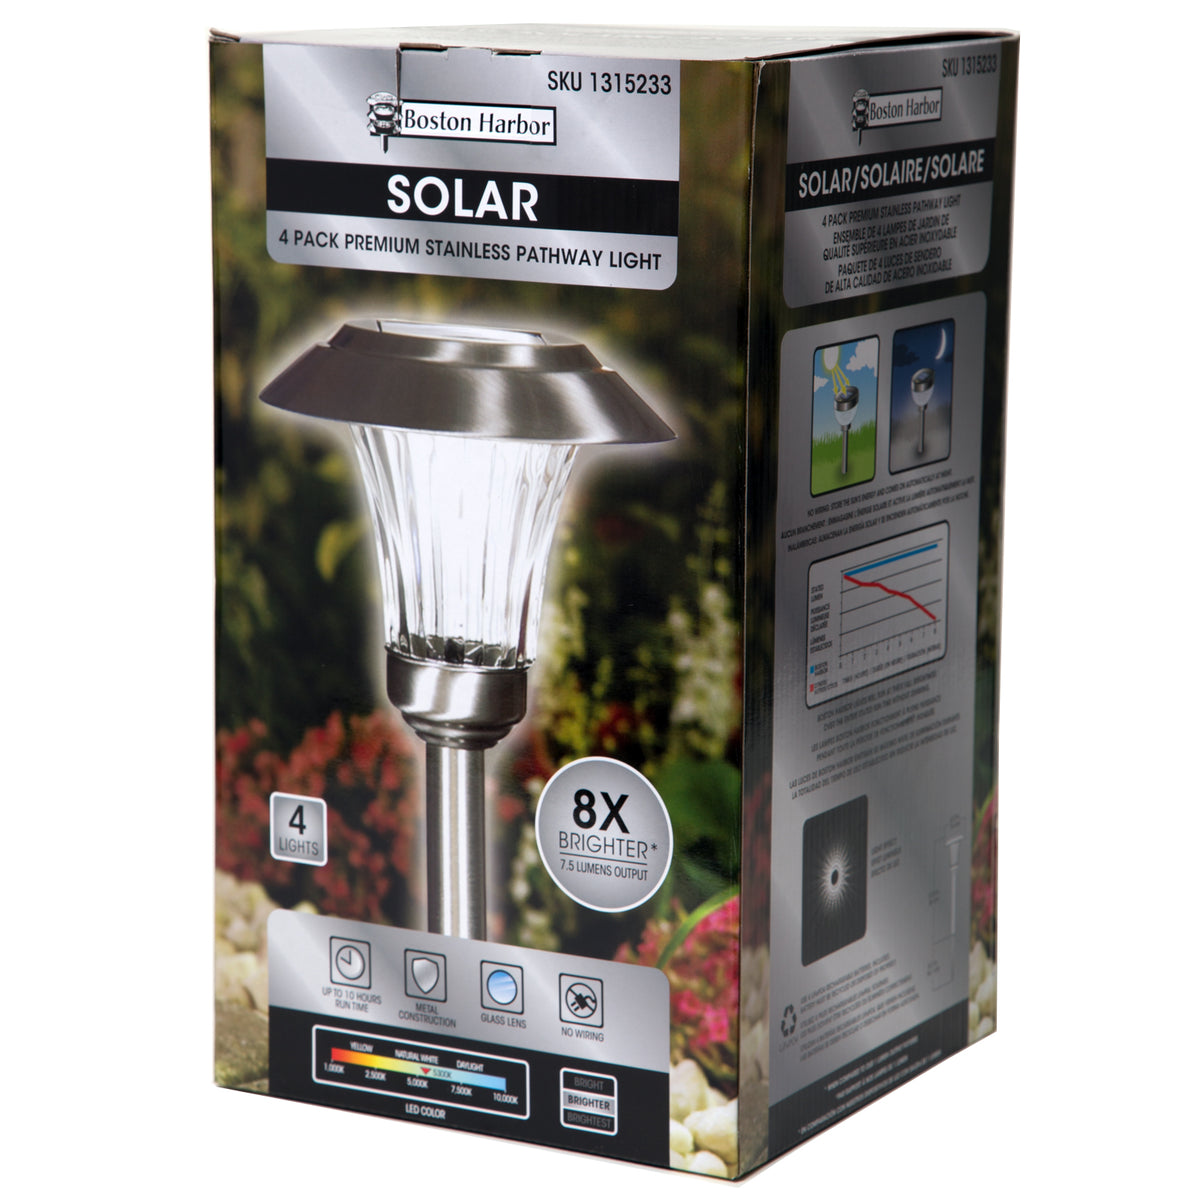 buy solar powered lights at cheap rate in bulk. wholesale & retail lawn & garden lighting & décor store.